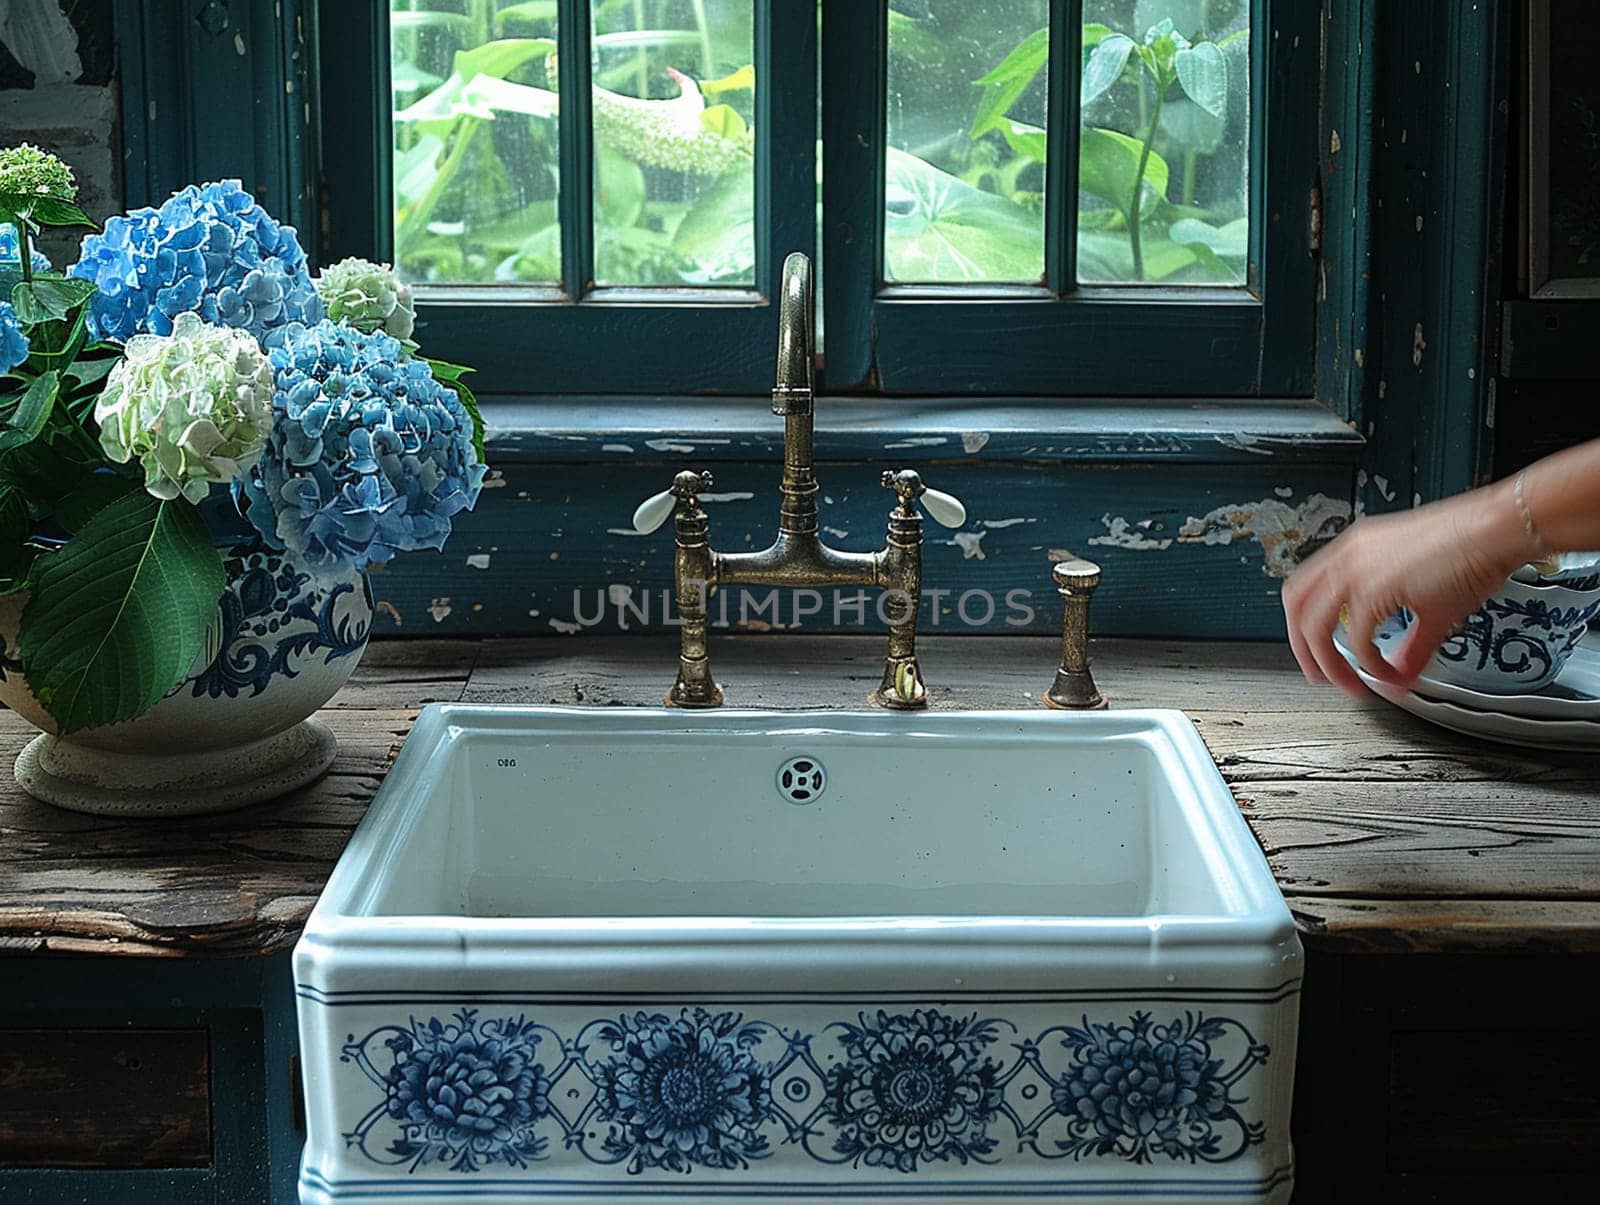 Classic French country kitchen with blue and white porcelain and farmhouse sink